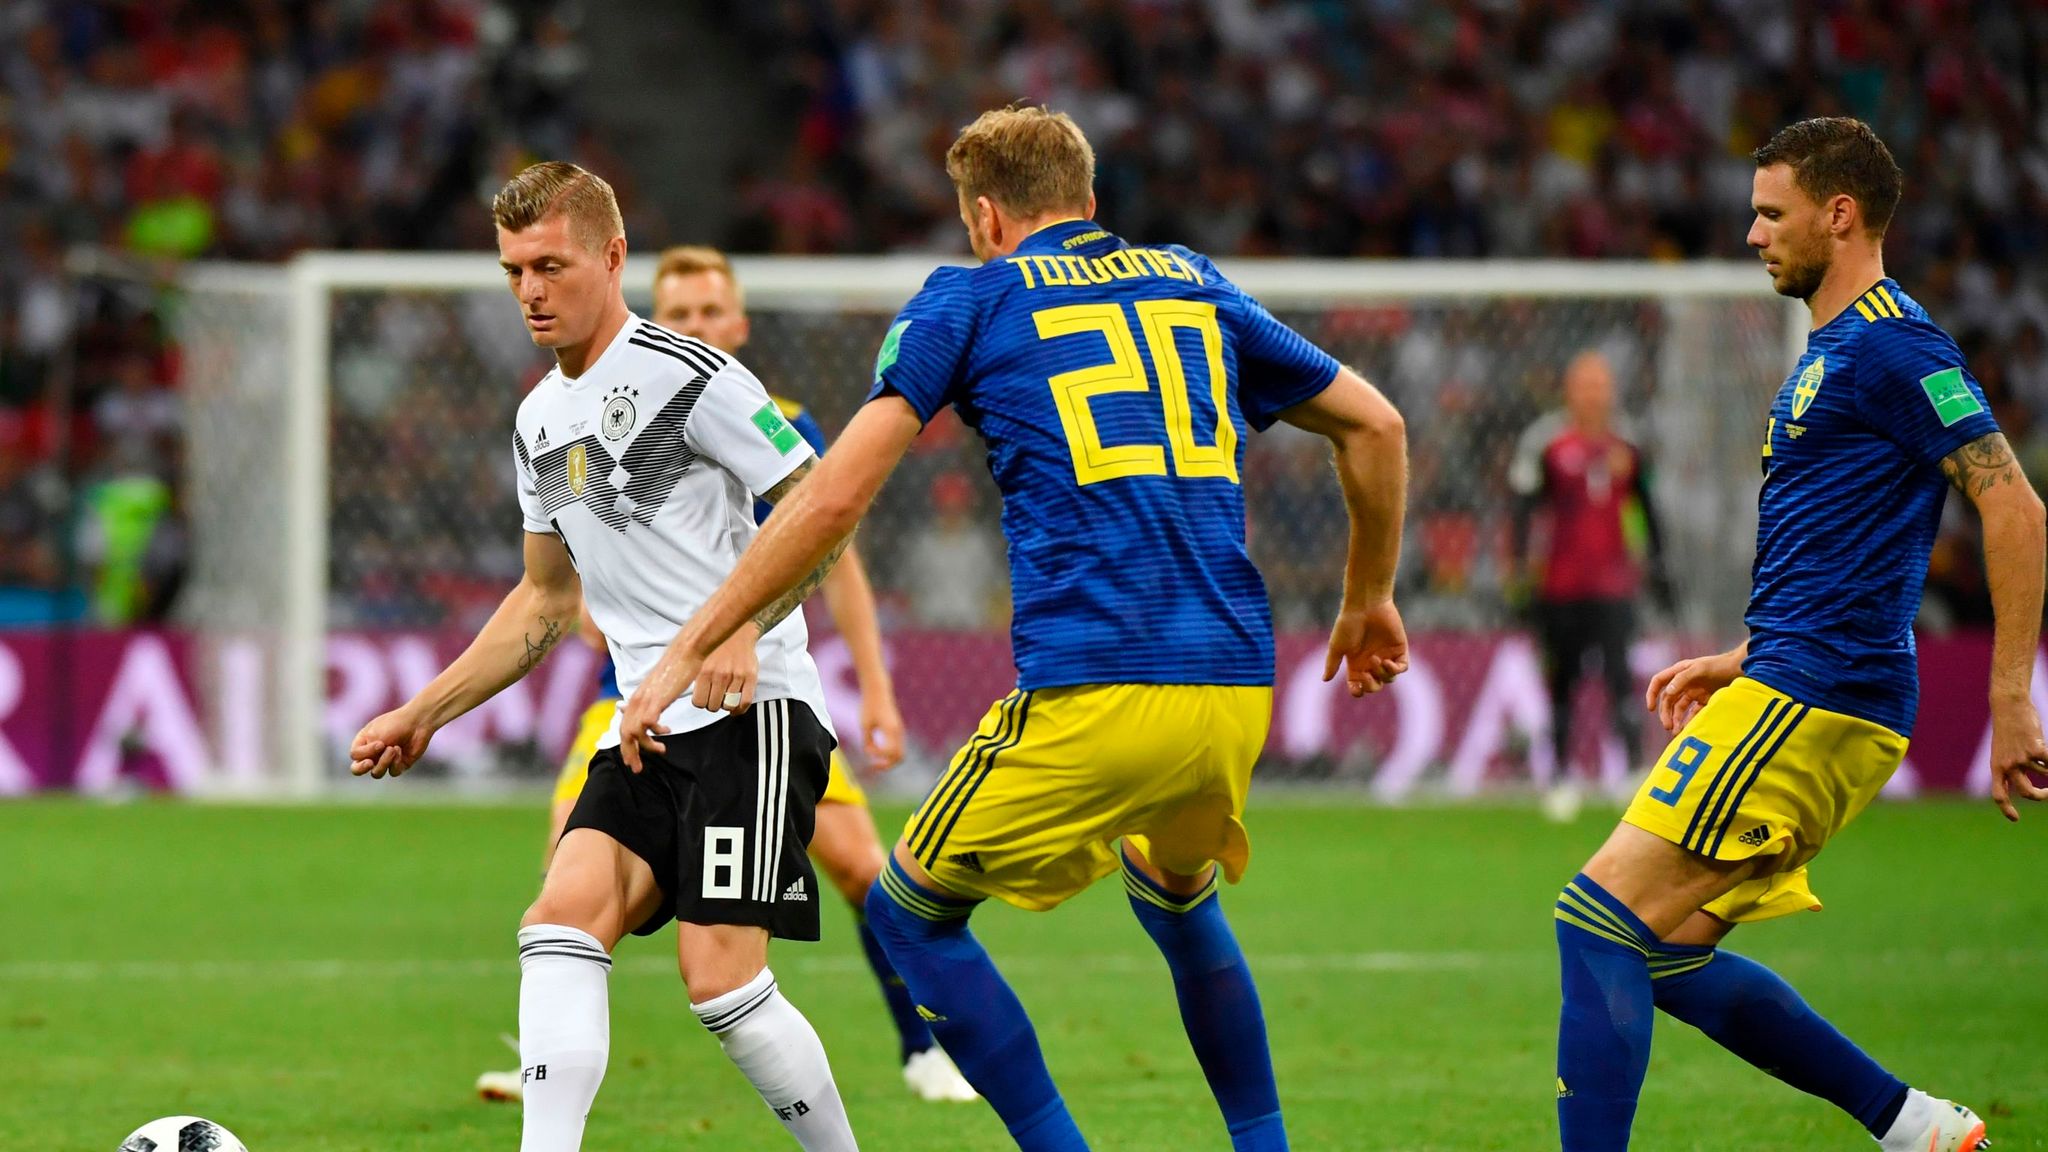 Germany 2 - 1 Sweden - Match Report & Highlights